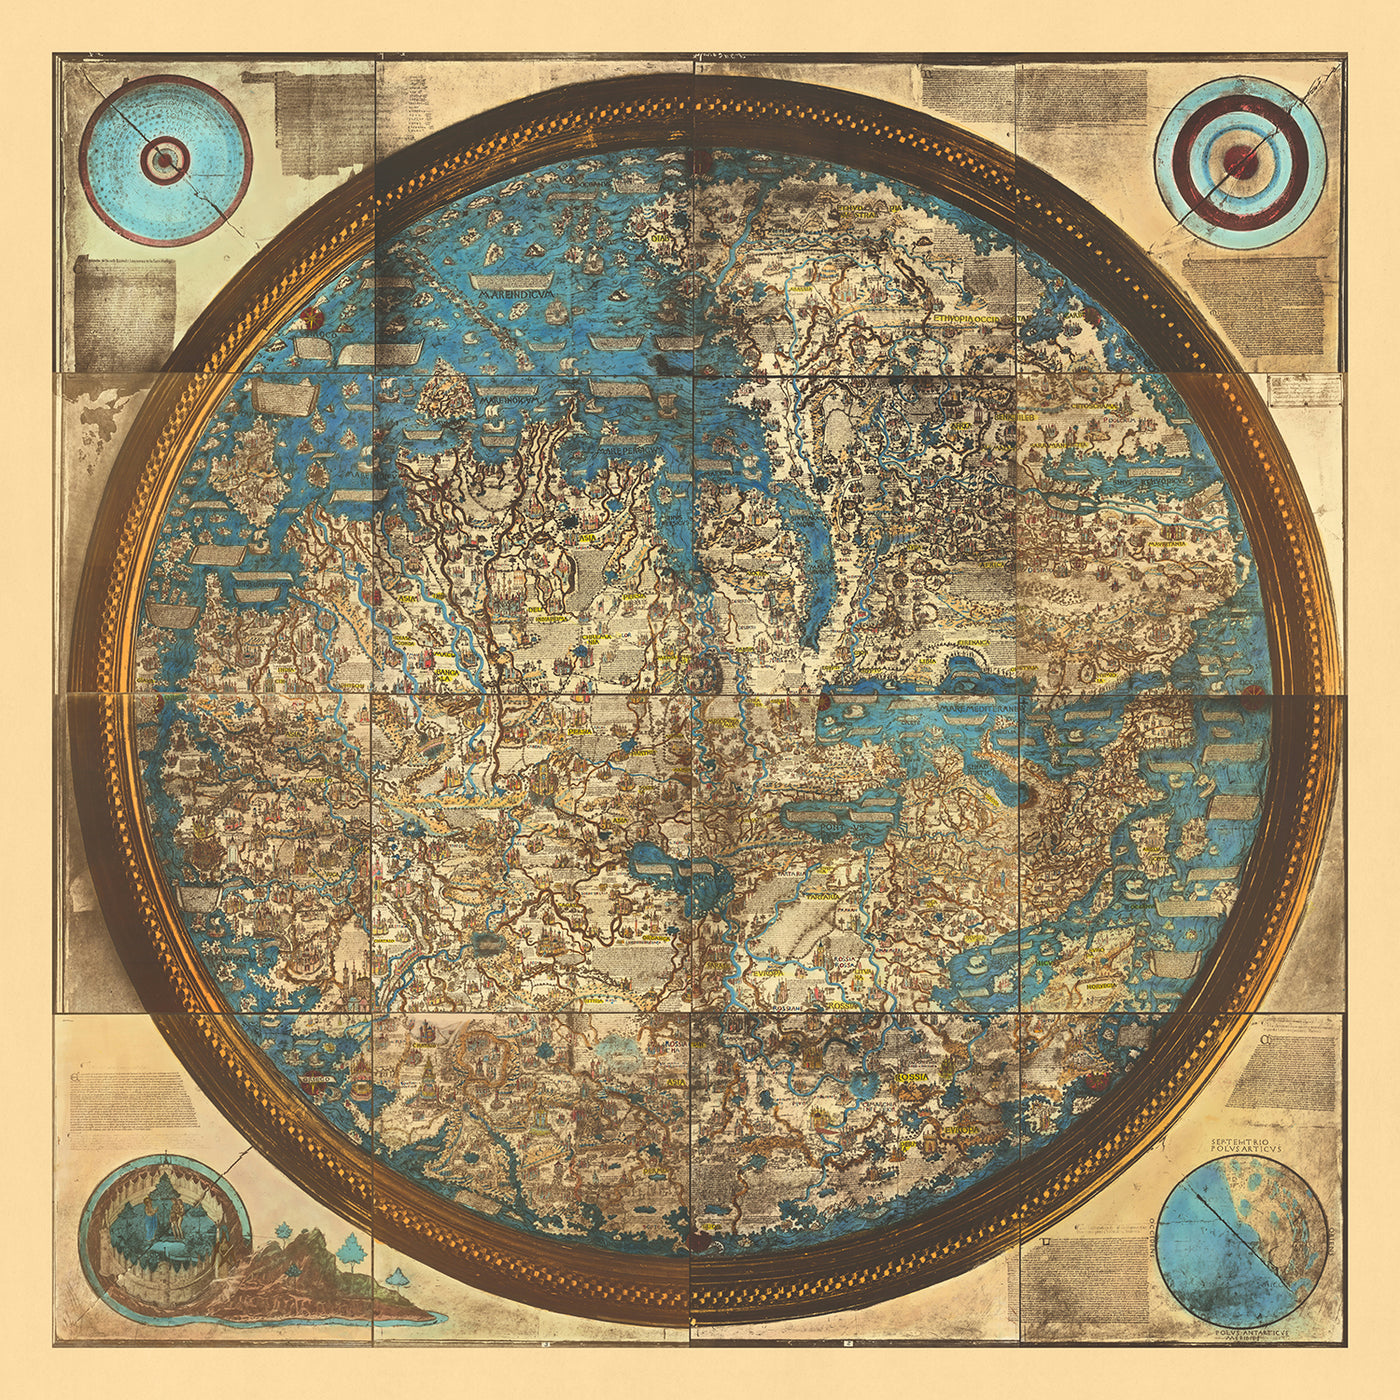 Rare Old Mappa Mundi by Fra Mauro, 1450: The Best Geocentric Medieval World Map